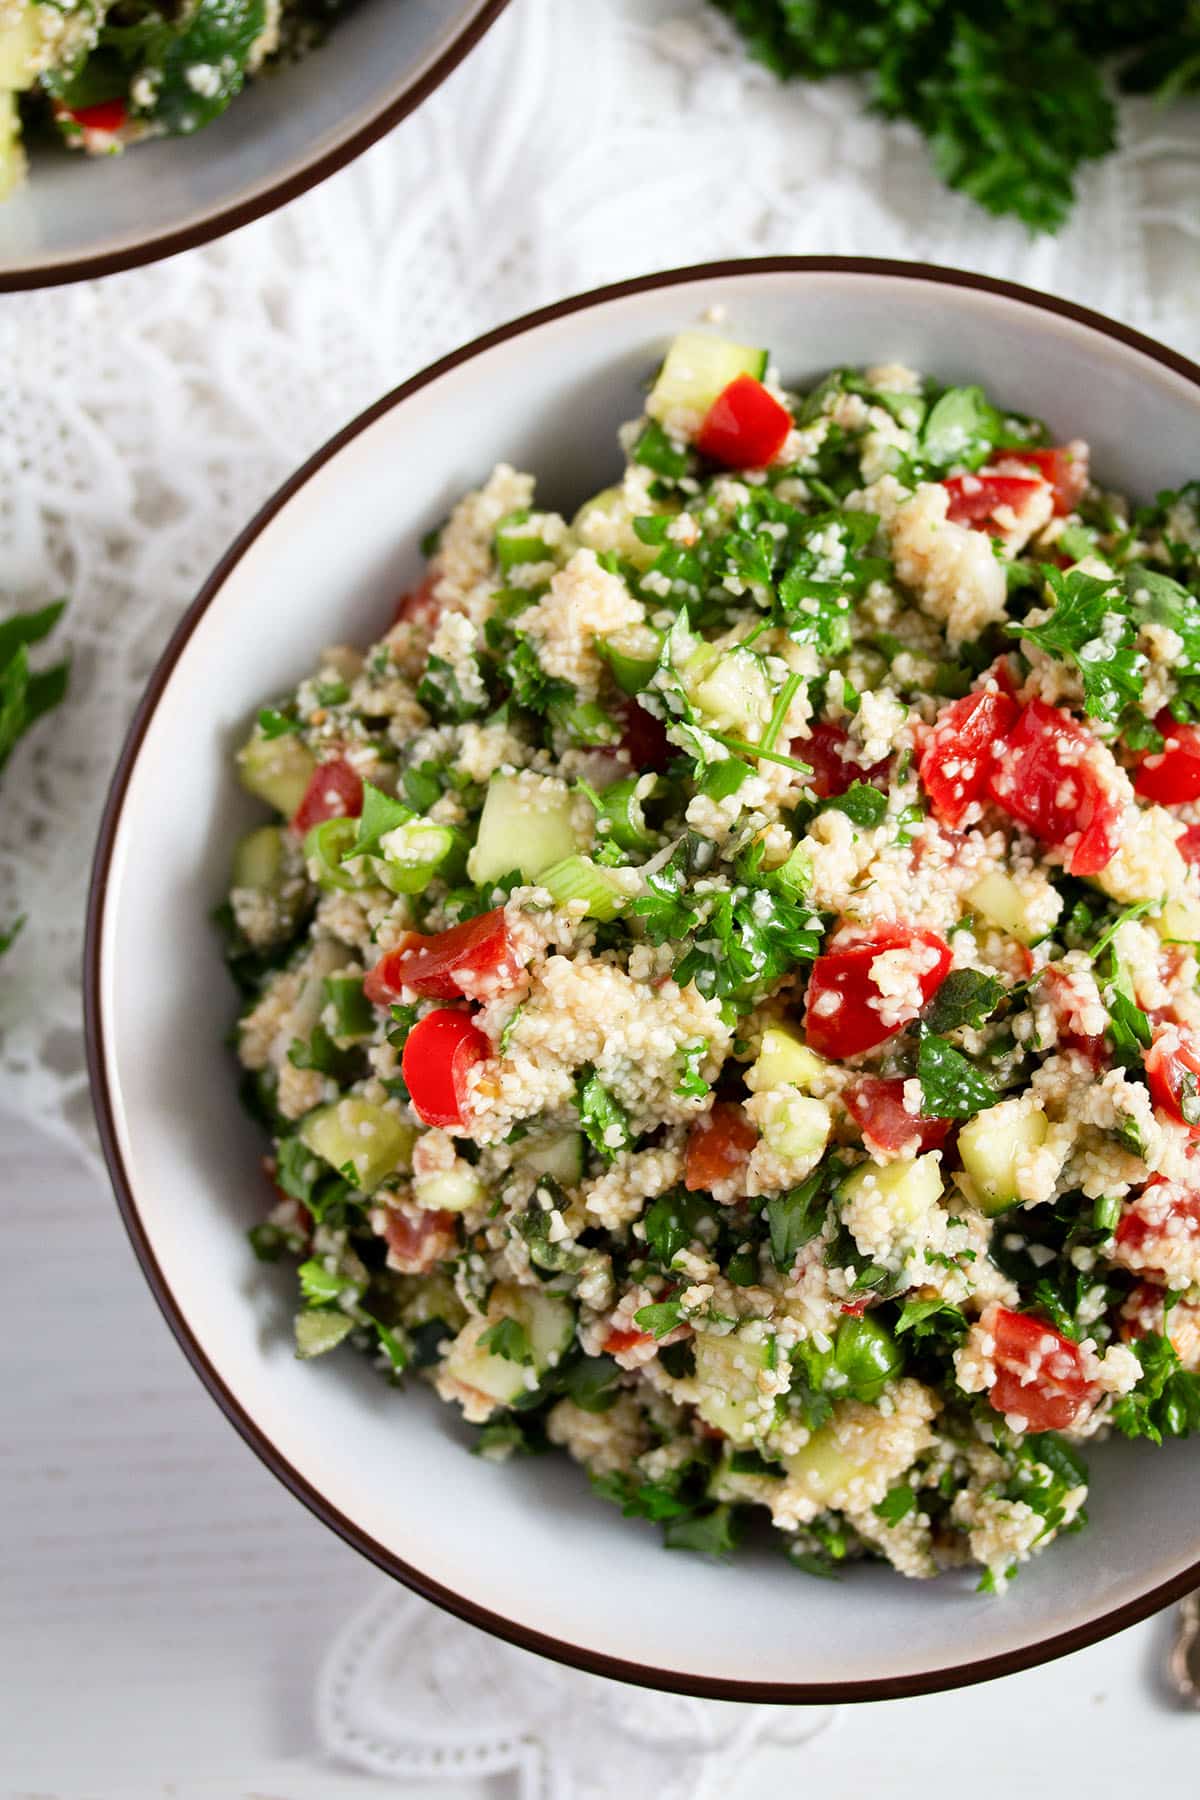 bowl of mediterranean salad with parsley, cucumbers, and bulgur.